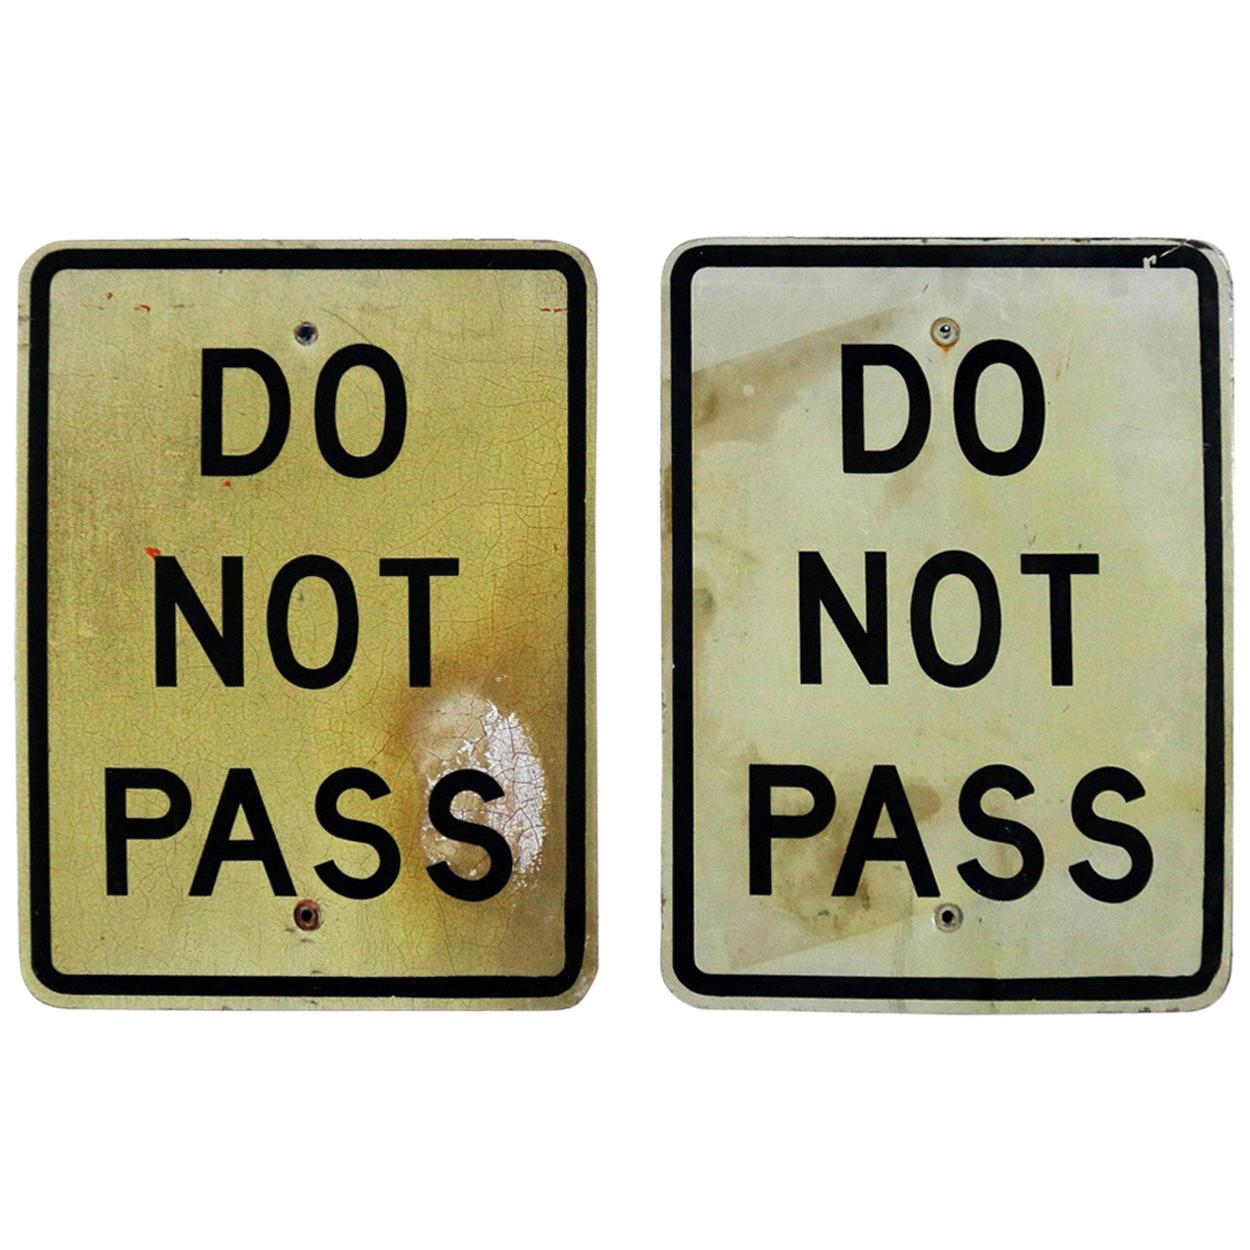 Vintage Do Not Pass Metal Traffic Signs